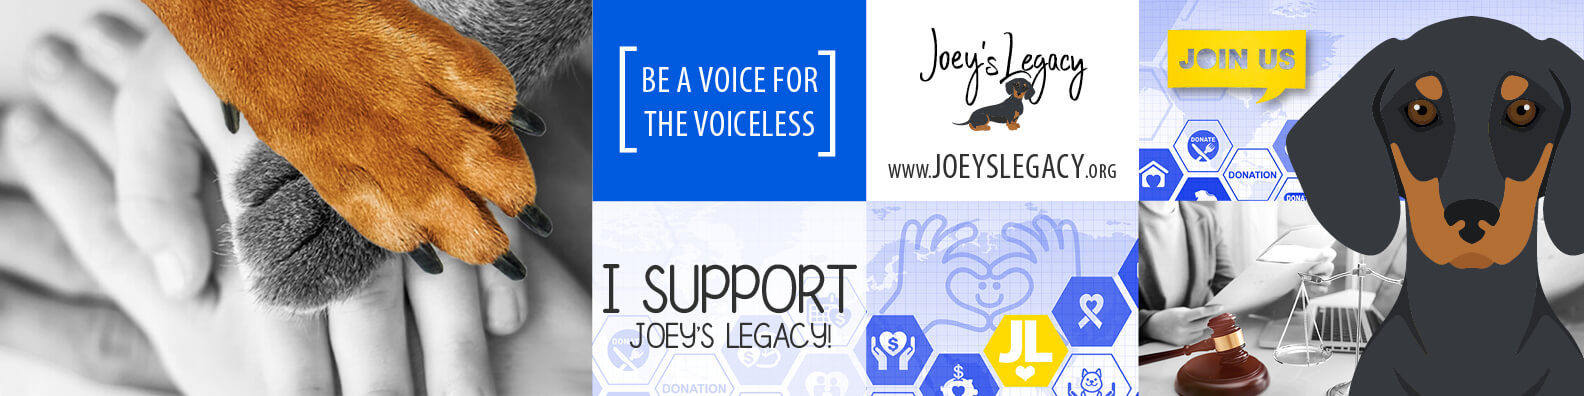 LinkedIn Personal Page Cover Image Supporting Joey's Legacy